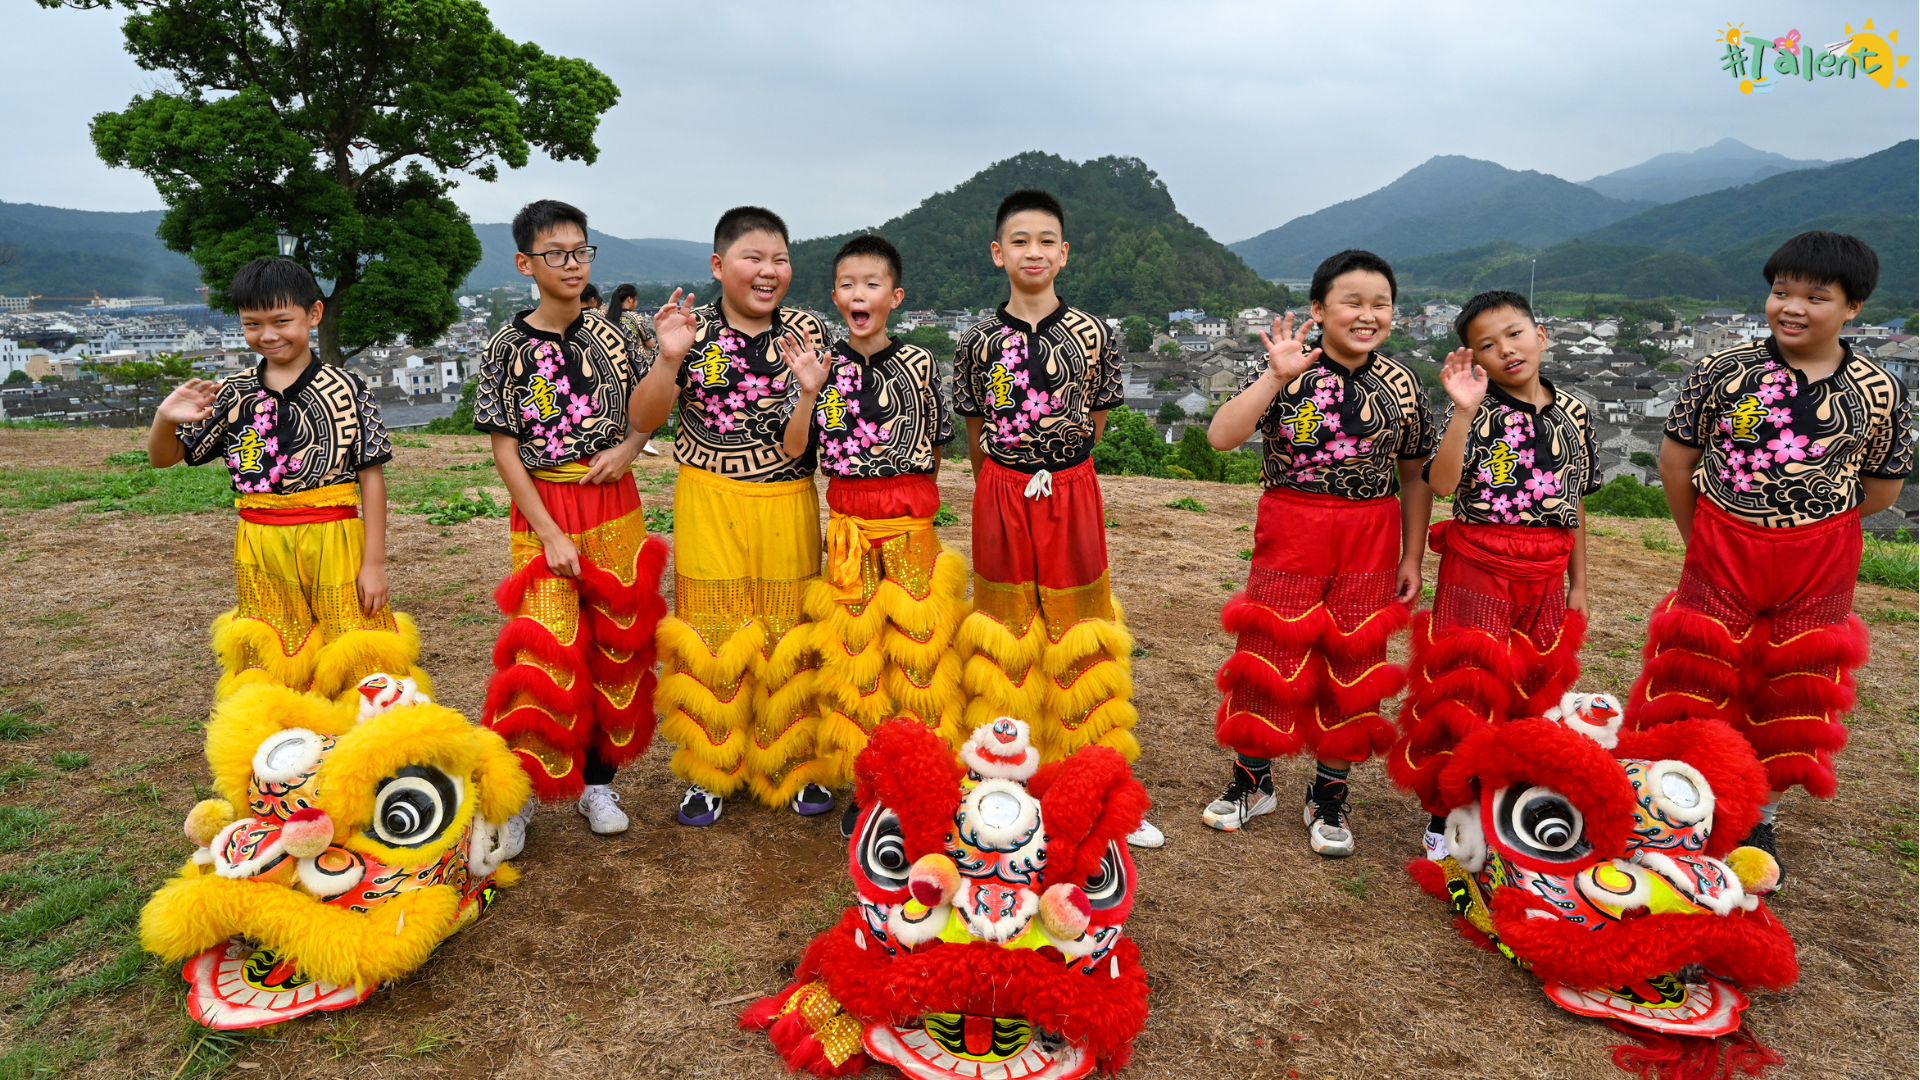 The current lion dance team of Qiantong ancient town. /CGTN